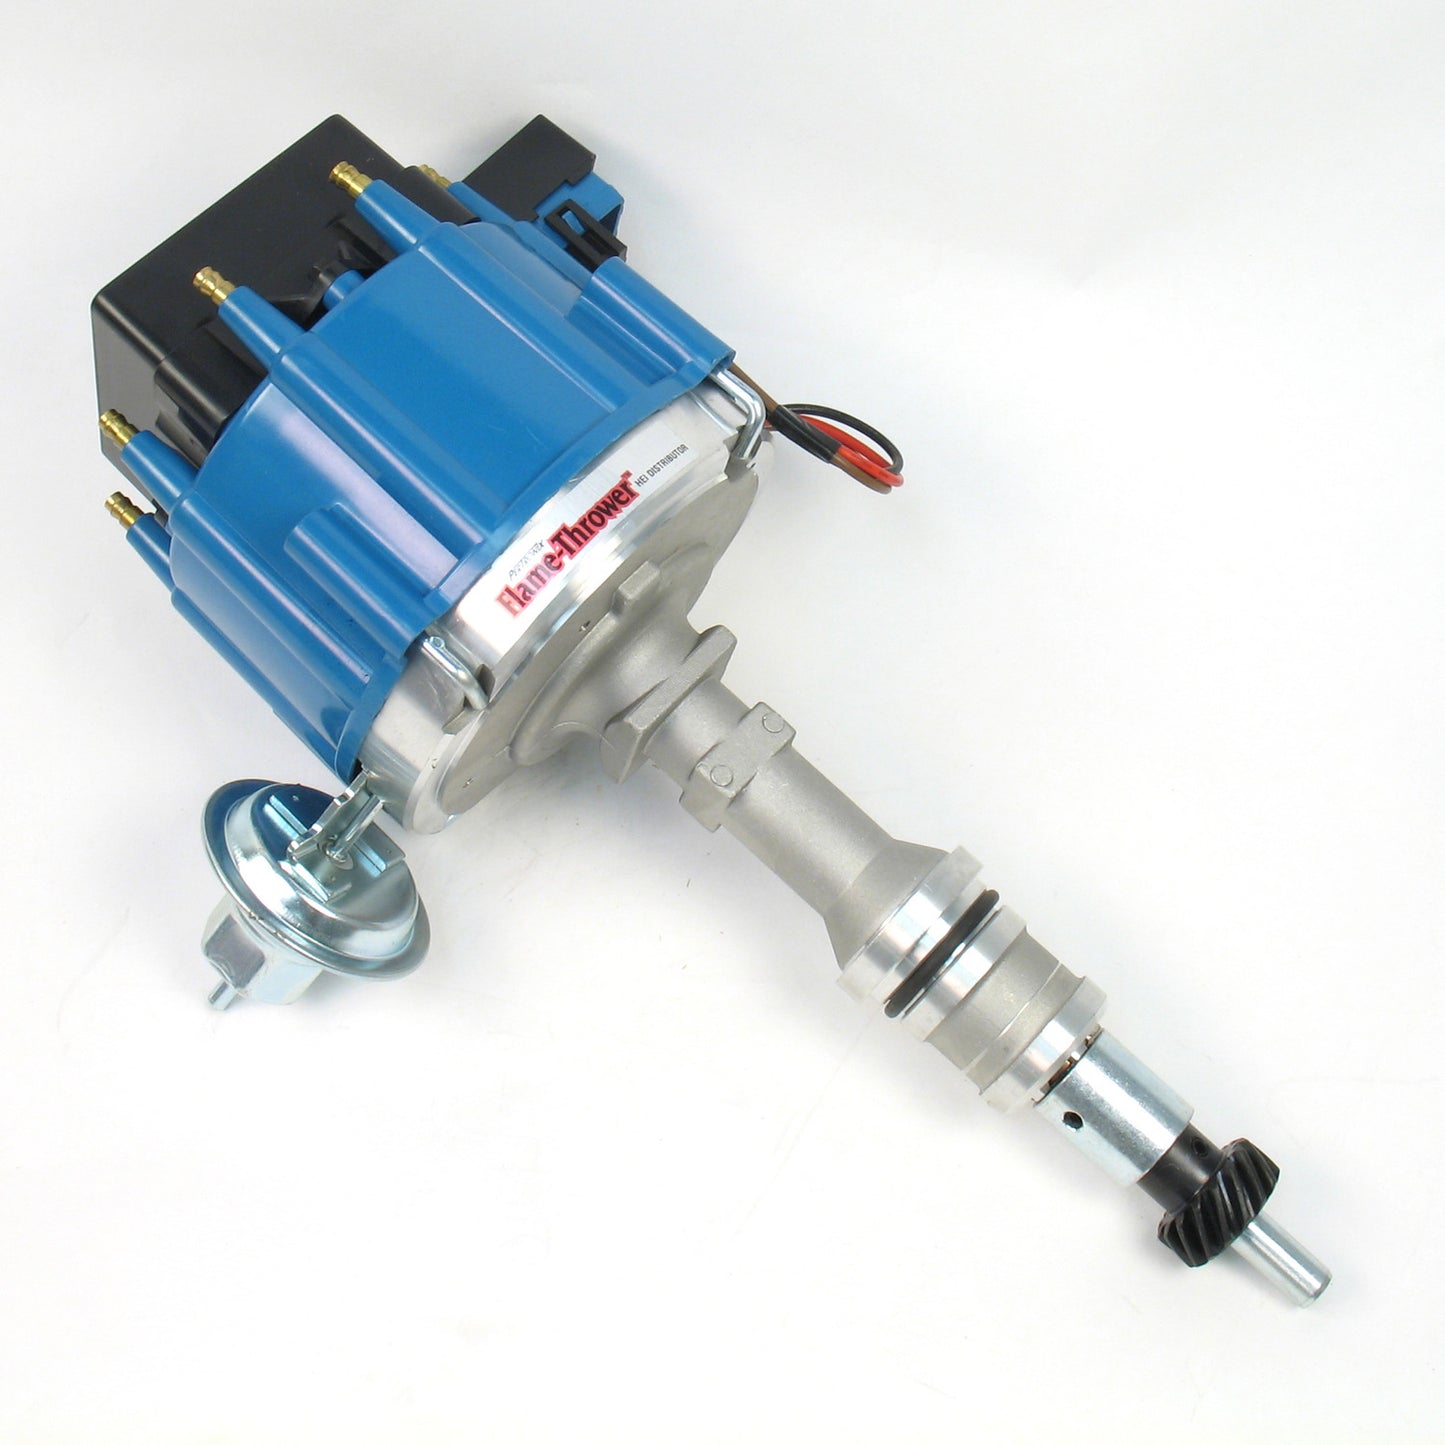 Parts Bin: Add an Adjustable Rev Limiter to Your GM HEI